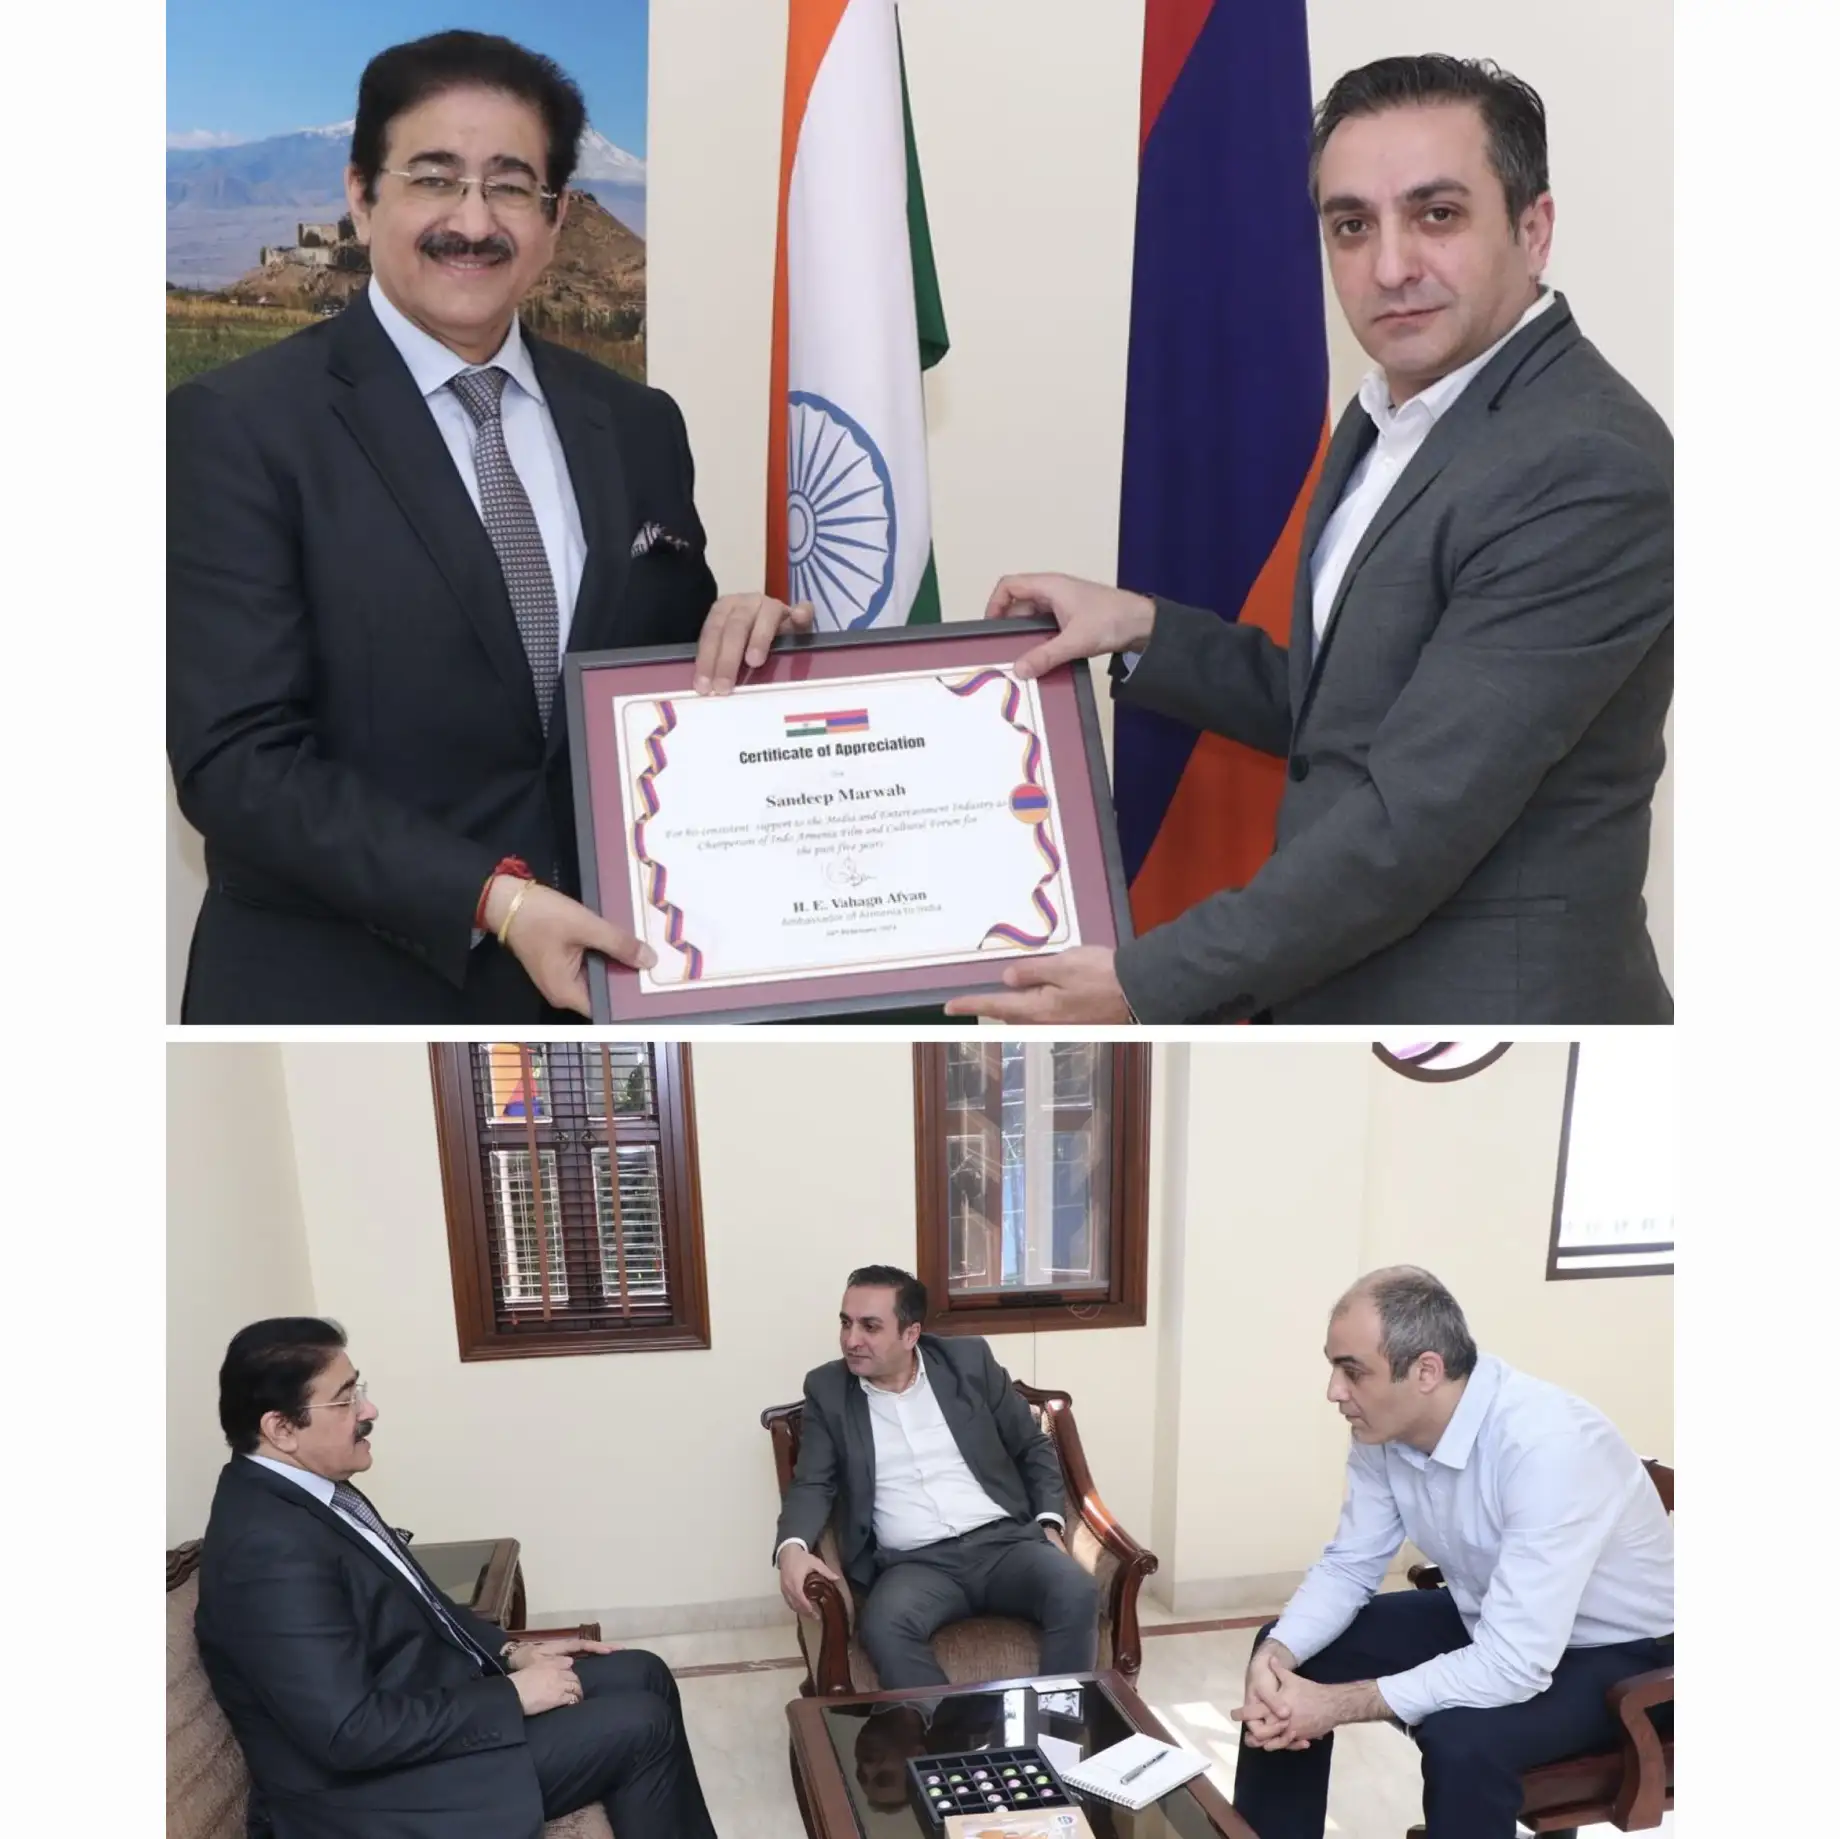 Sandeep Marwah Honored by Ambassador for His Services to Armenia